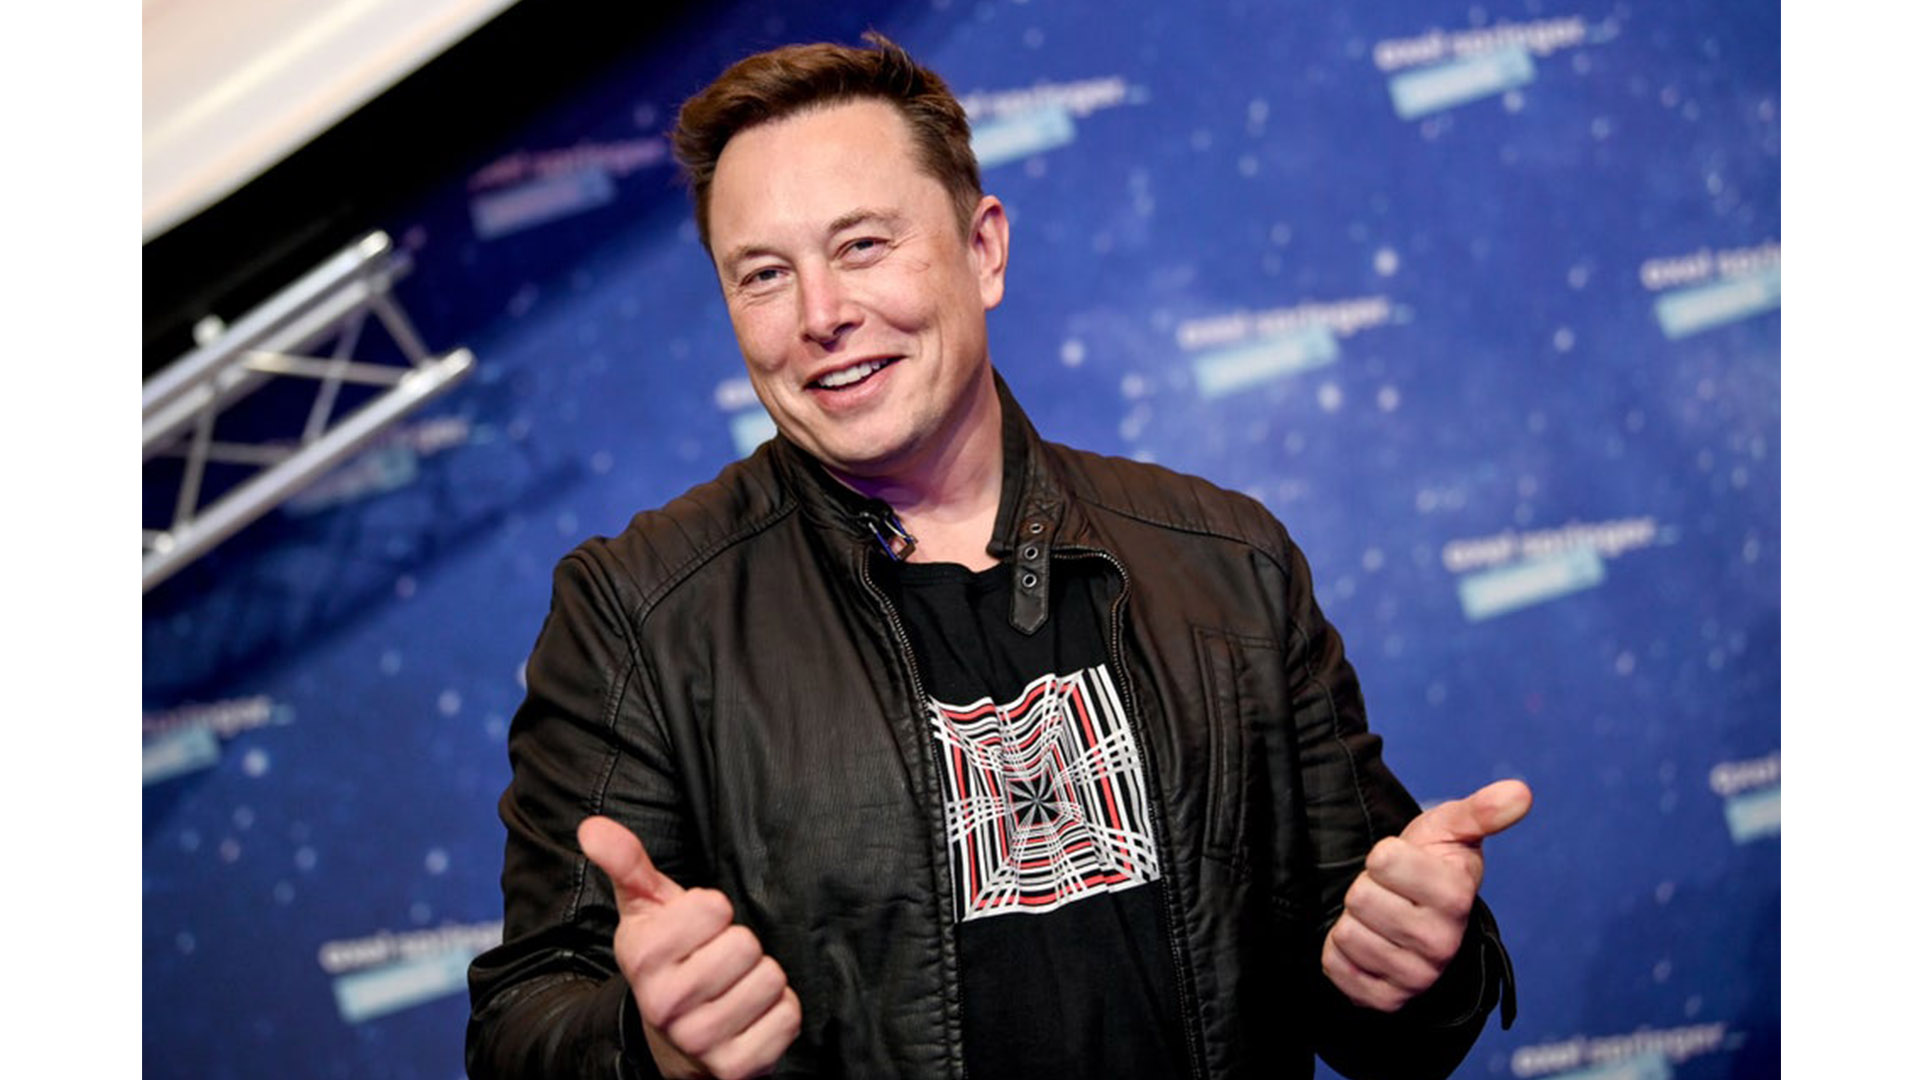 Alan Musk became world’s richest man for only 5 days